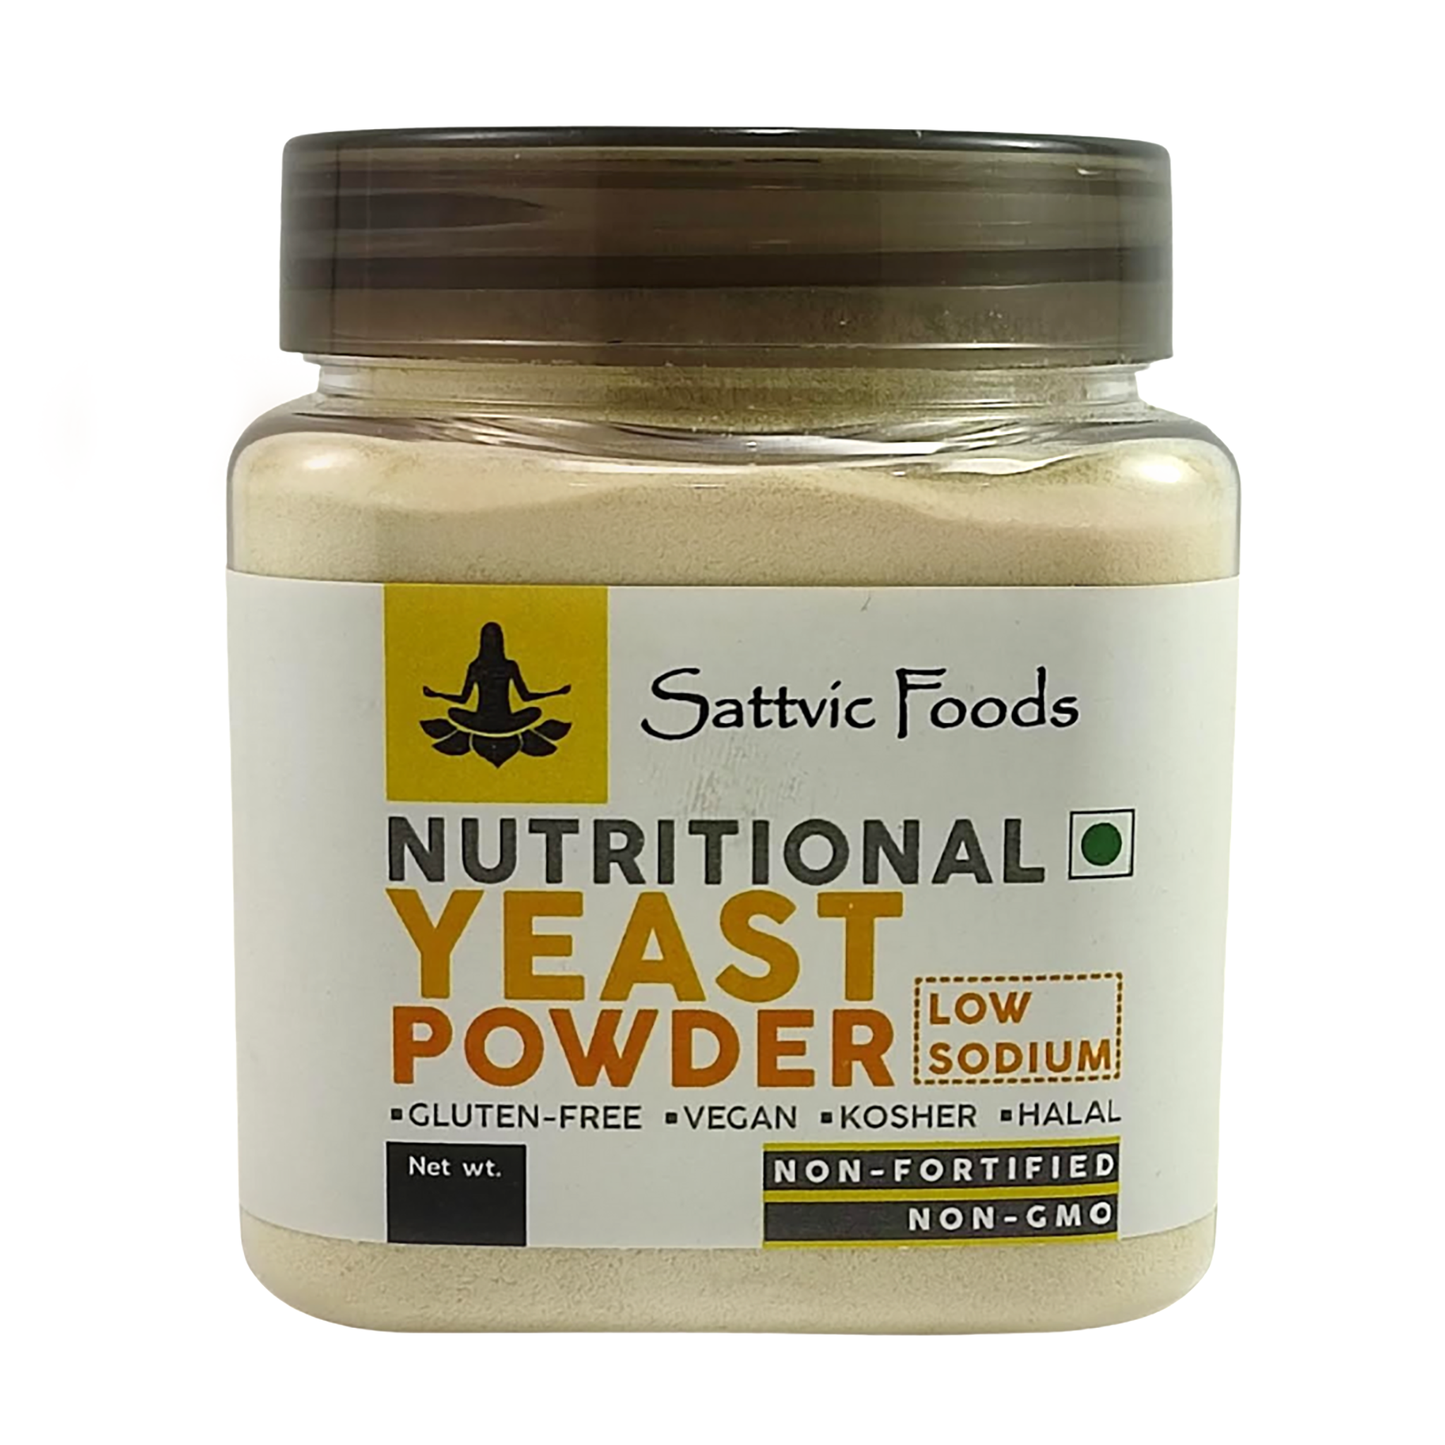 Nutritional Yeast Bland Powder - 60g - Sattvic Foods